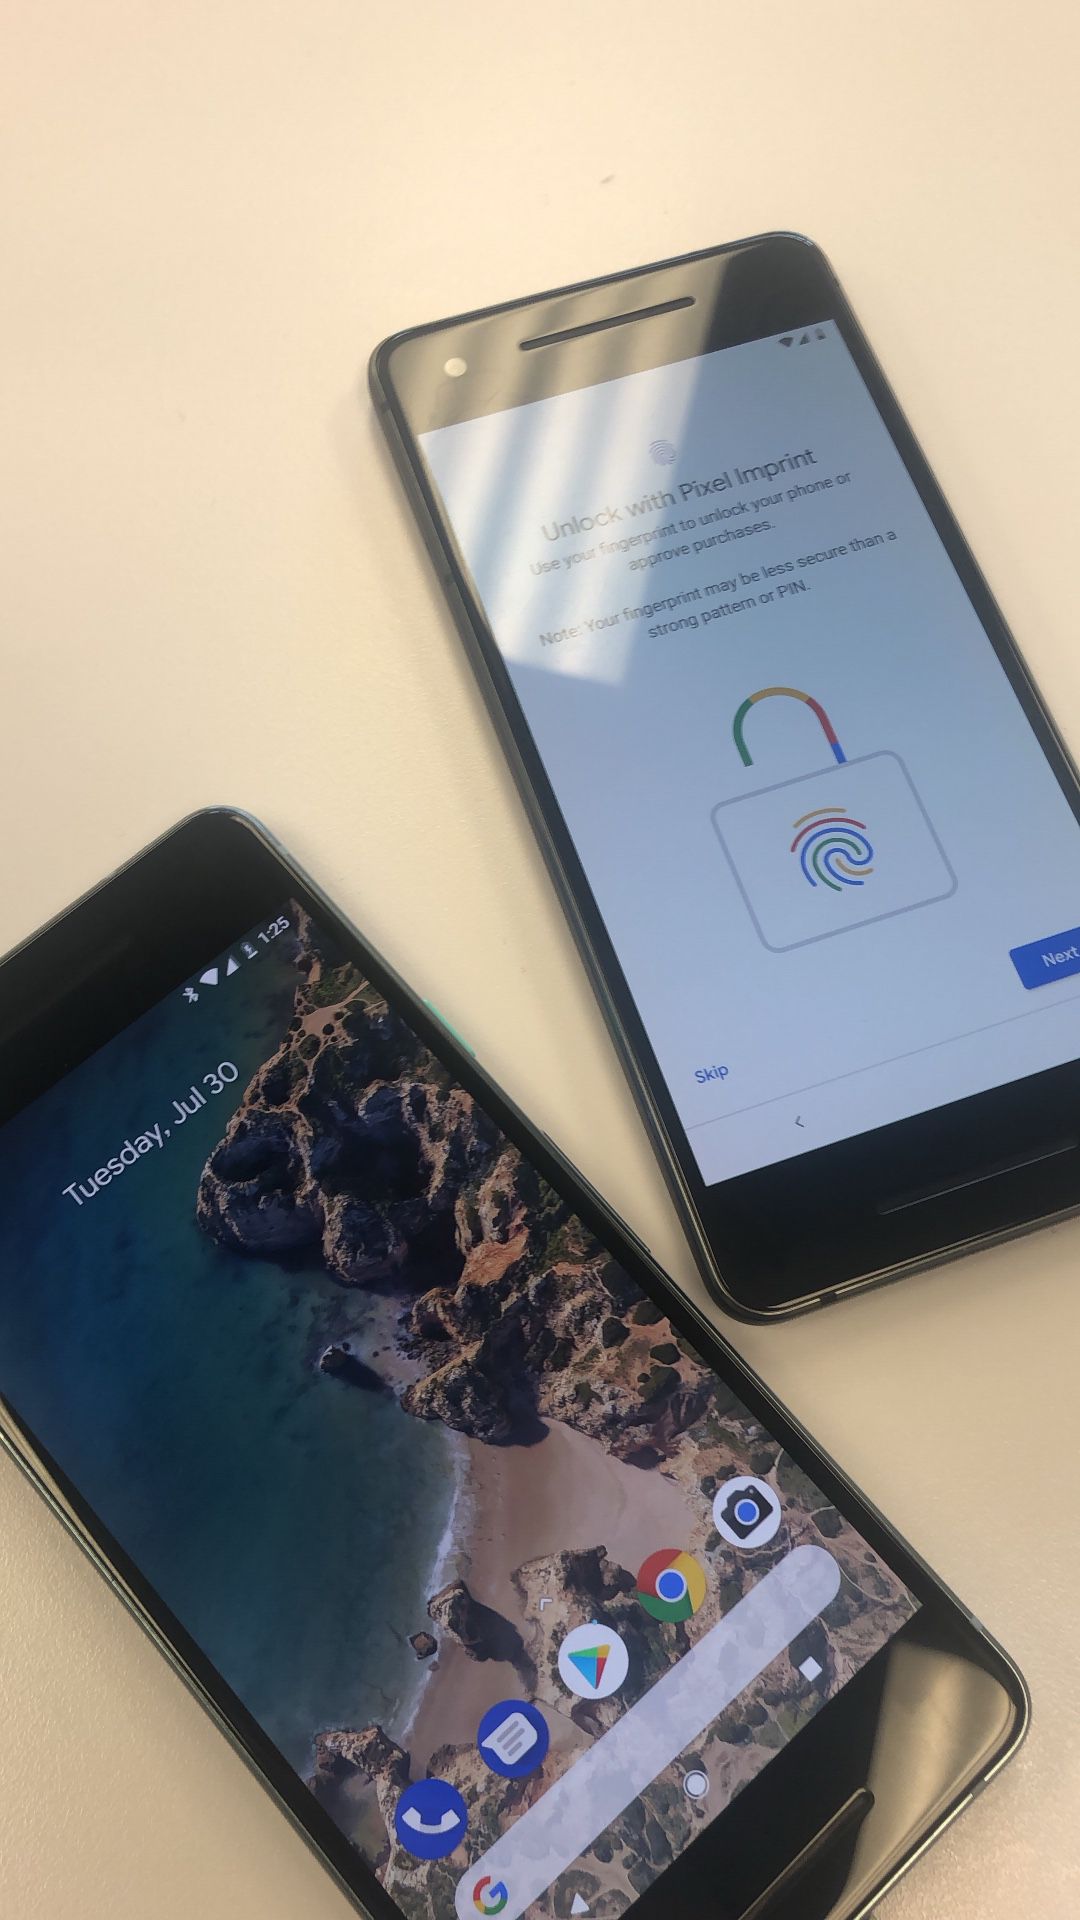 Google Pixel 2 unlocked to any carrier